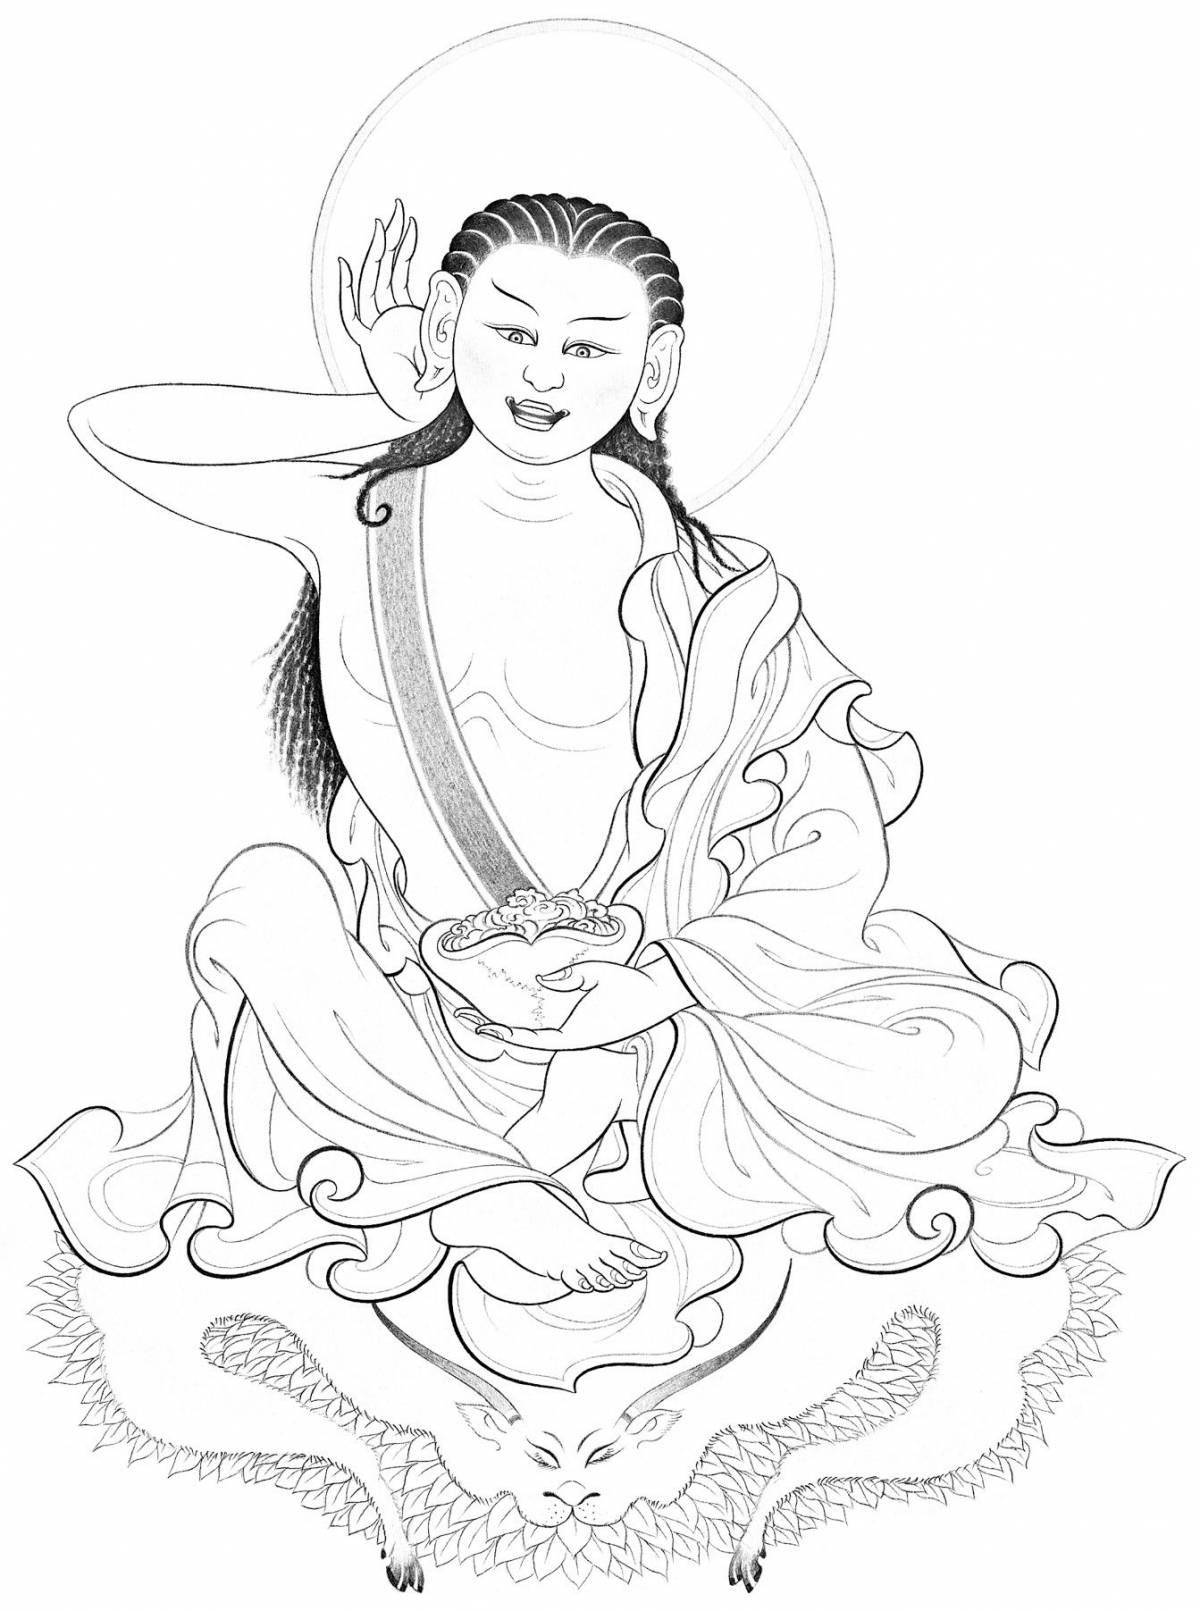 Exquisite Buddhism coloring book